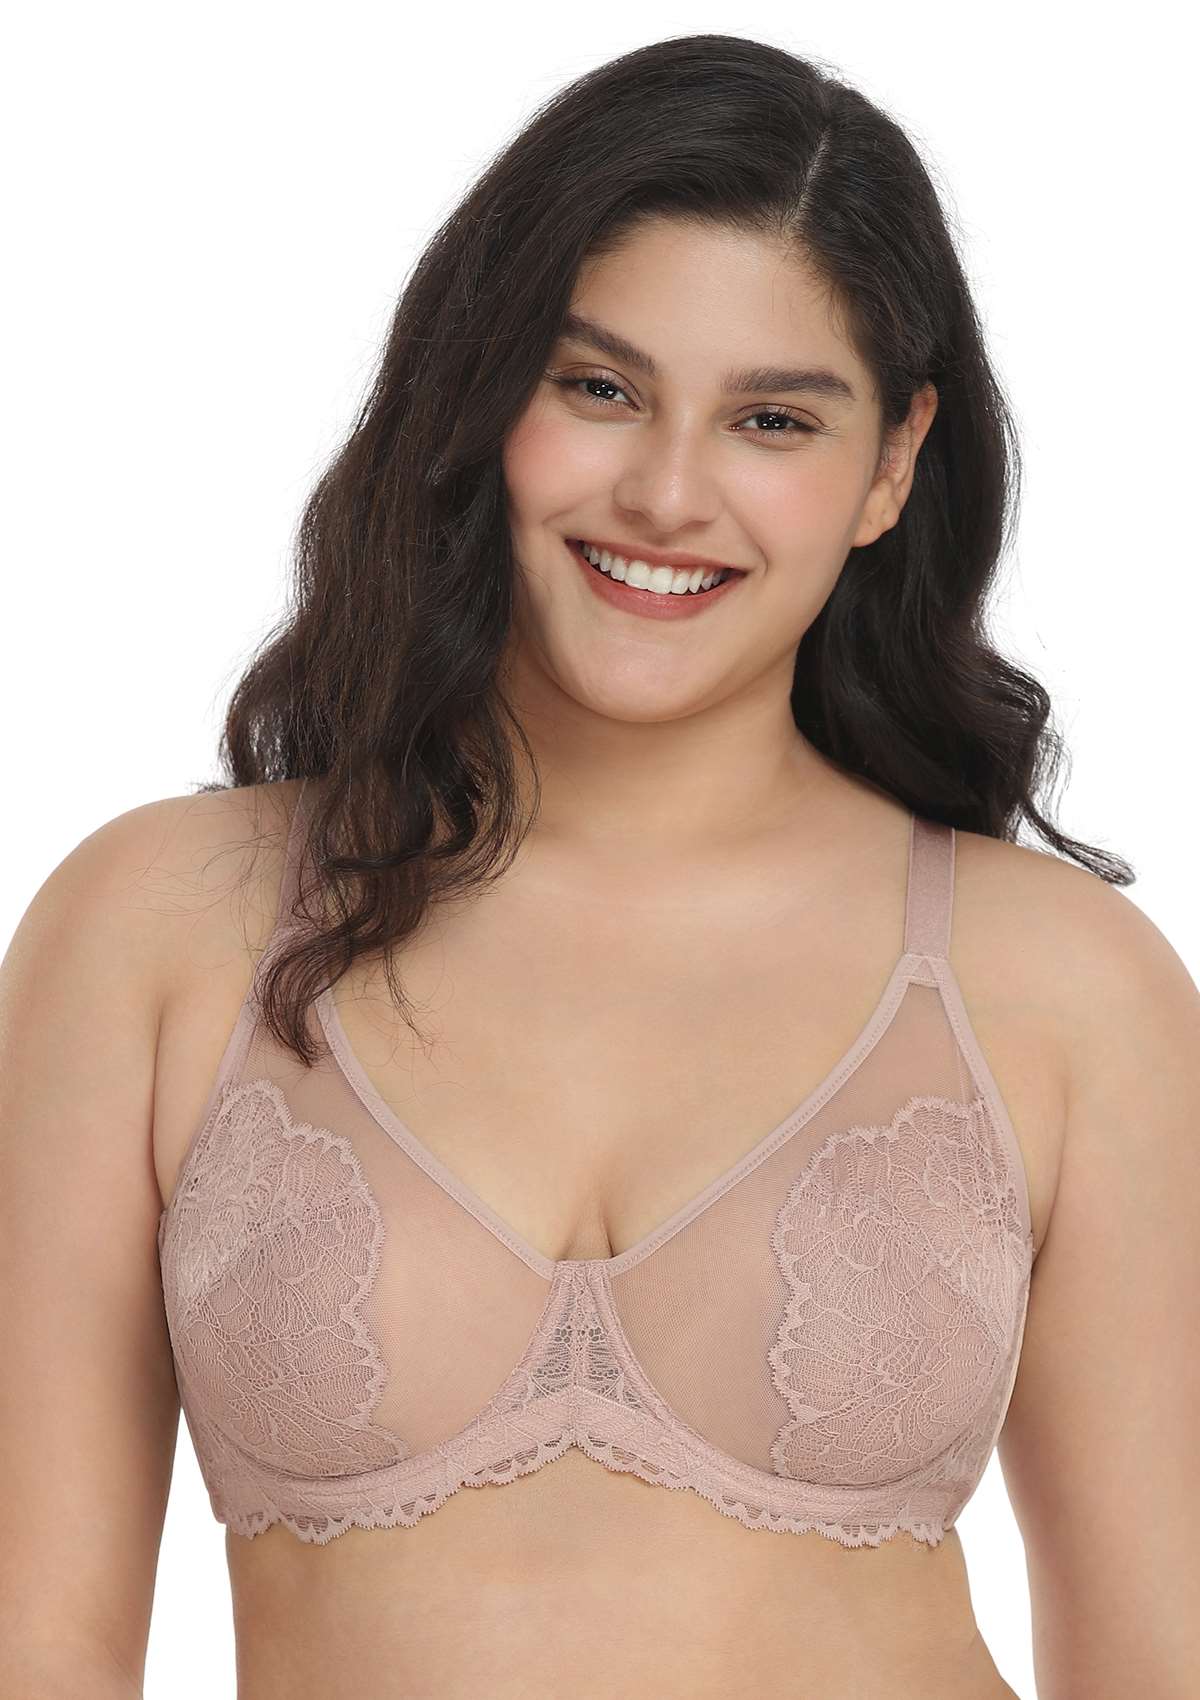 HSIA Blossom Lace Bra And Panties Set: Best Bra For Large Busts - Dark Pink / 42 / H